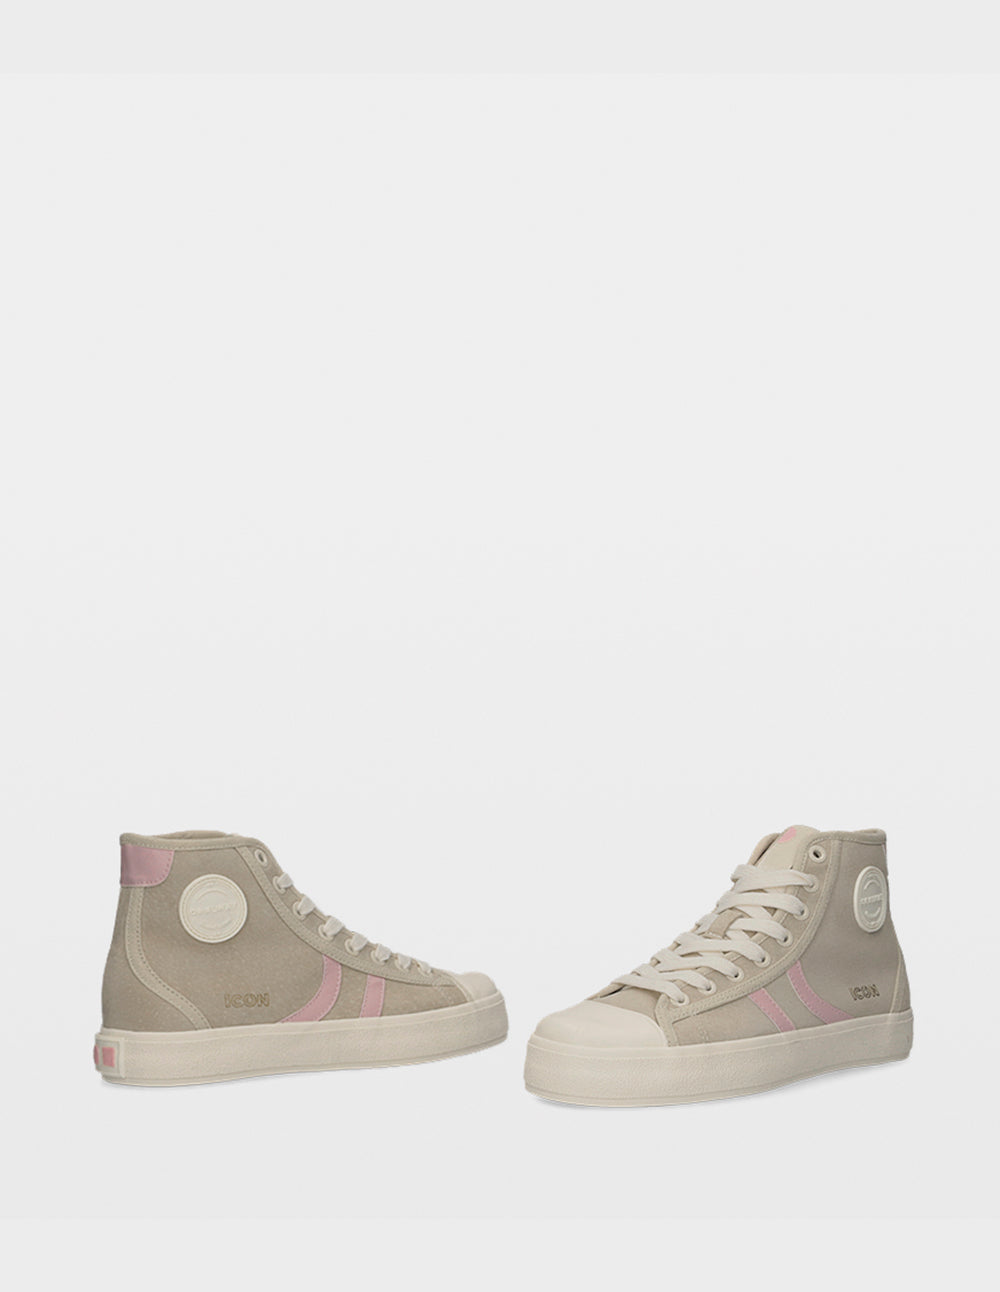 ICON-HI BEIGE/PINK LEATHER MUJER